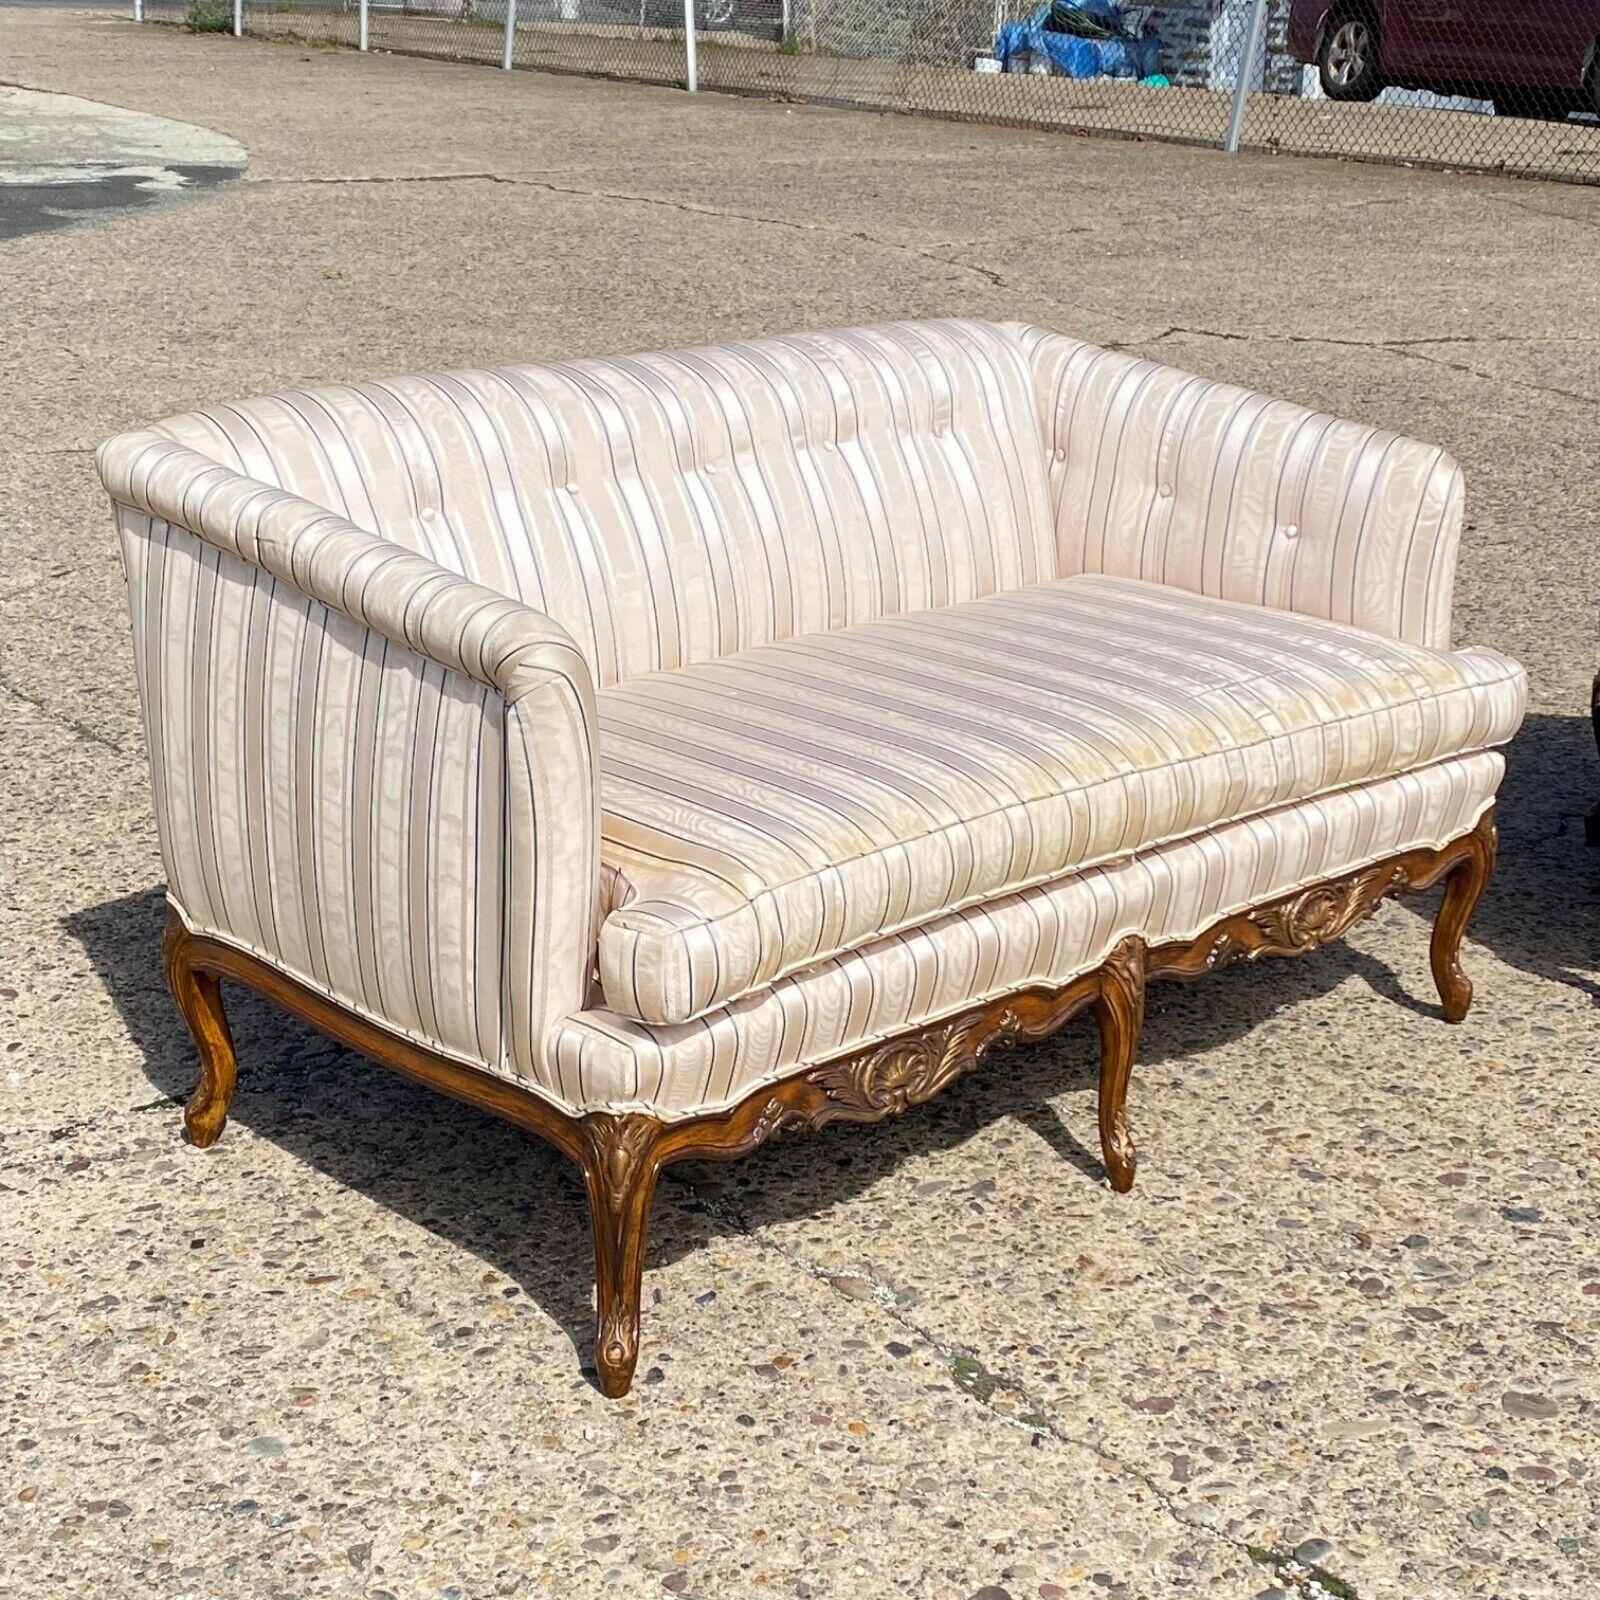 Vintage French Louis XV Provincial Style Upholstered Loveseat Sofa Settee Set- a Pair. Item features solid wood construction, shapely carved cabriole legs with gold accents, slightly rolled arms, wonderful frames to reupholster. Circa Mid to Late